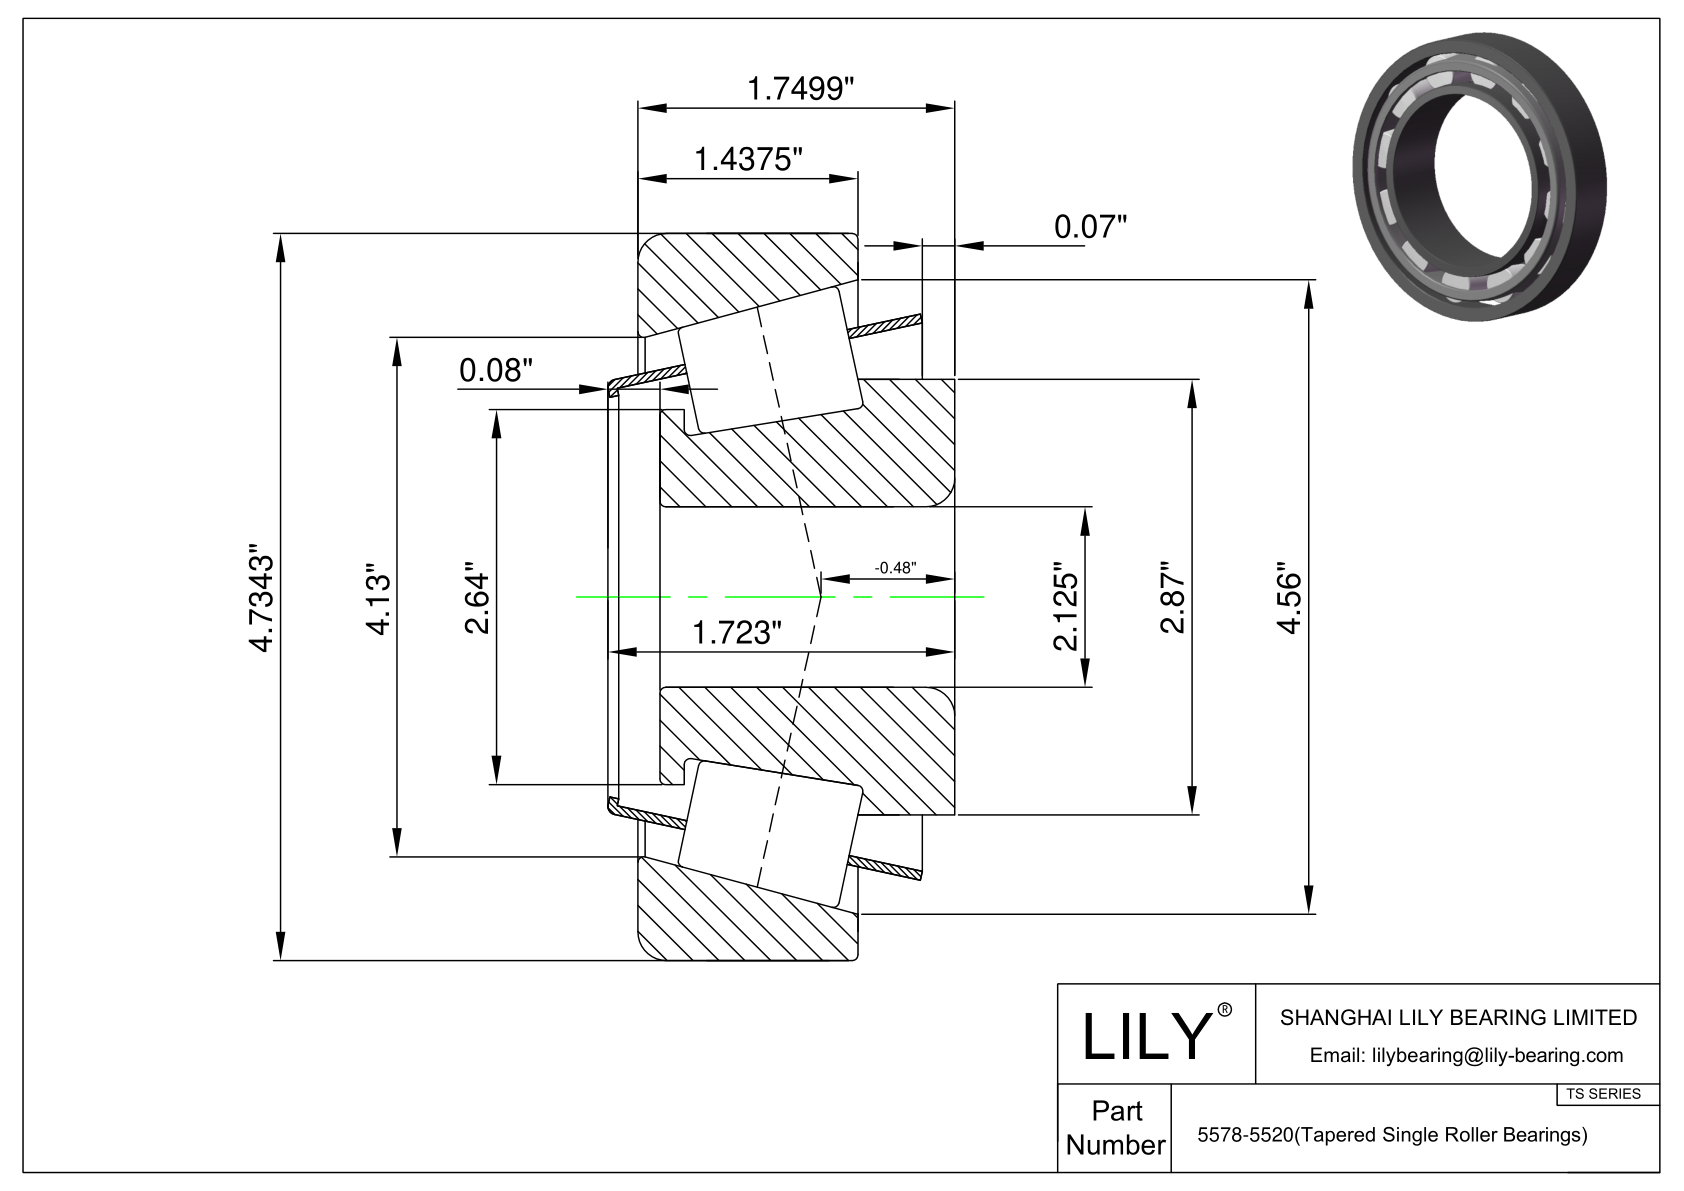 5578-5520 TS (Tapered Single Roller Bearings) (Imperial) cad drawing